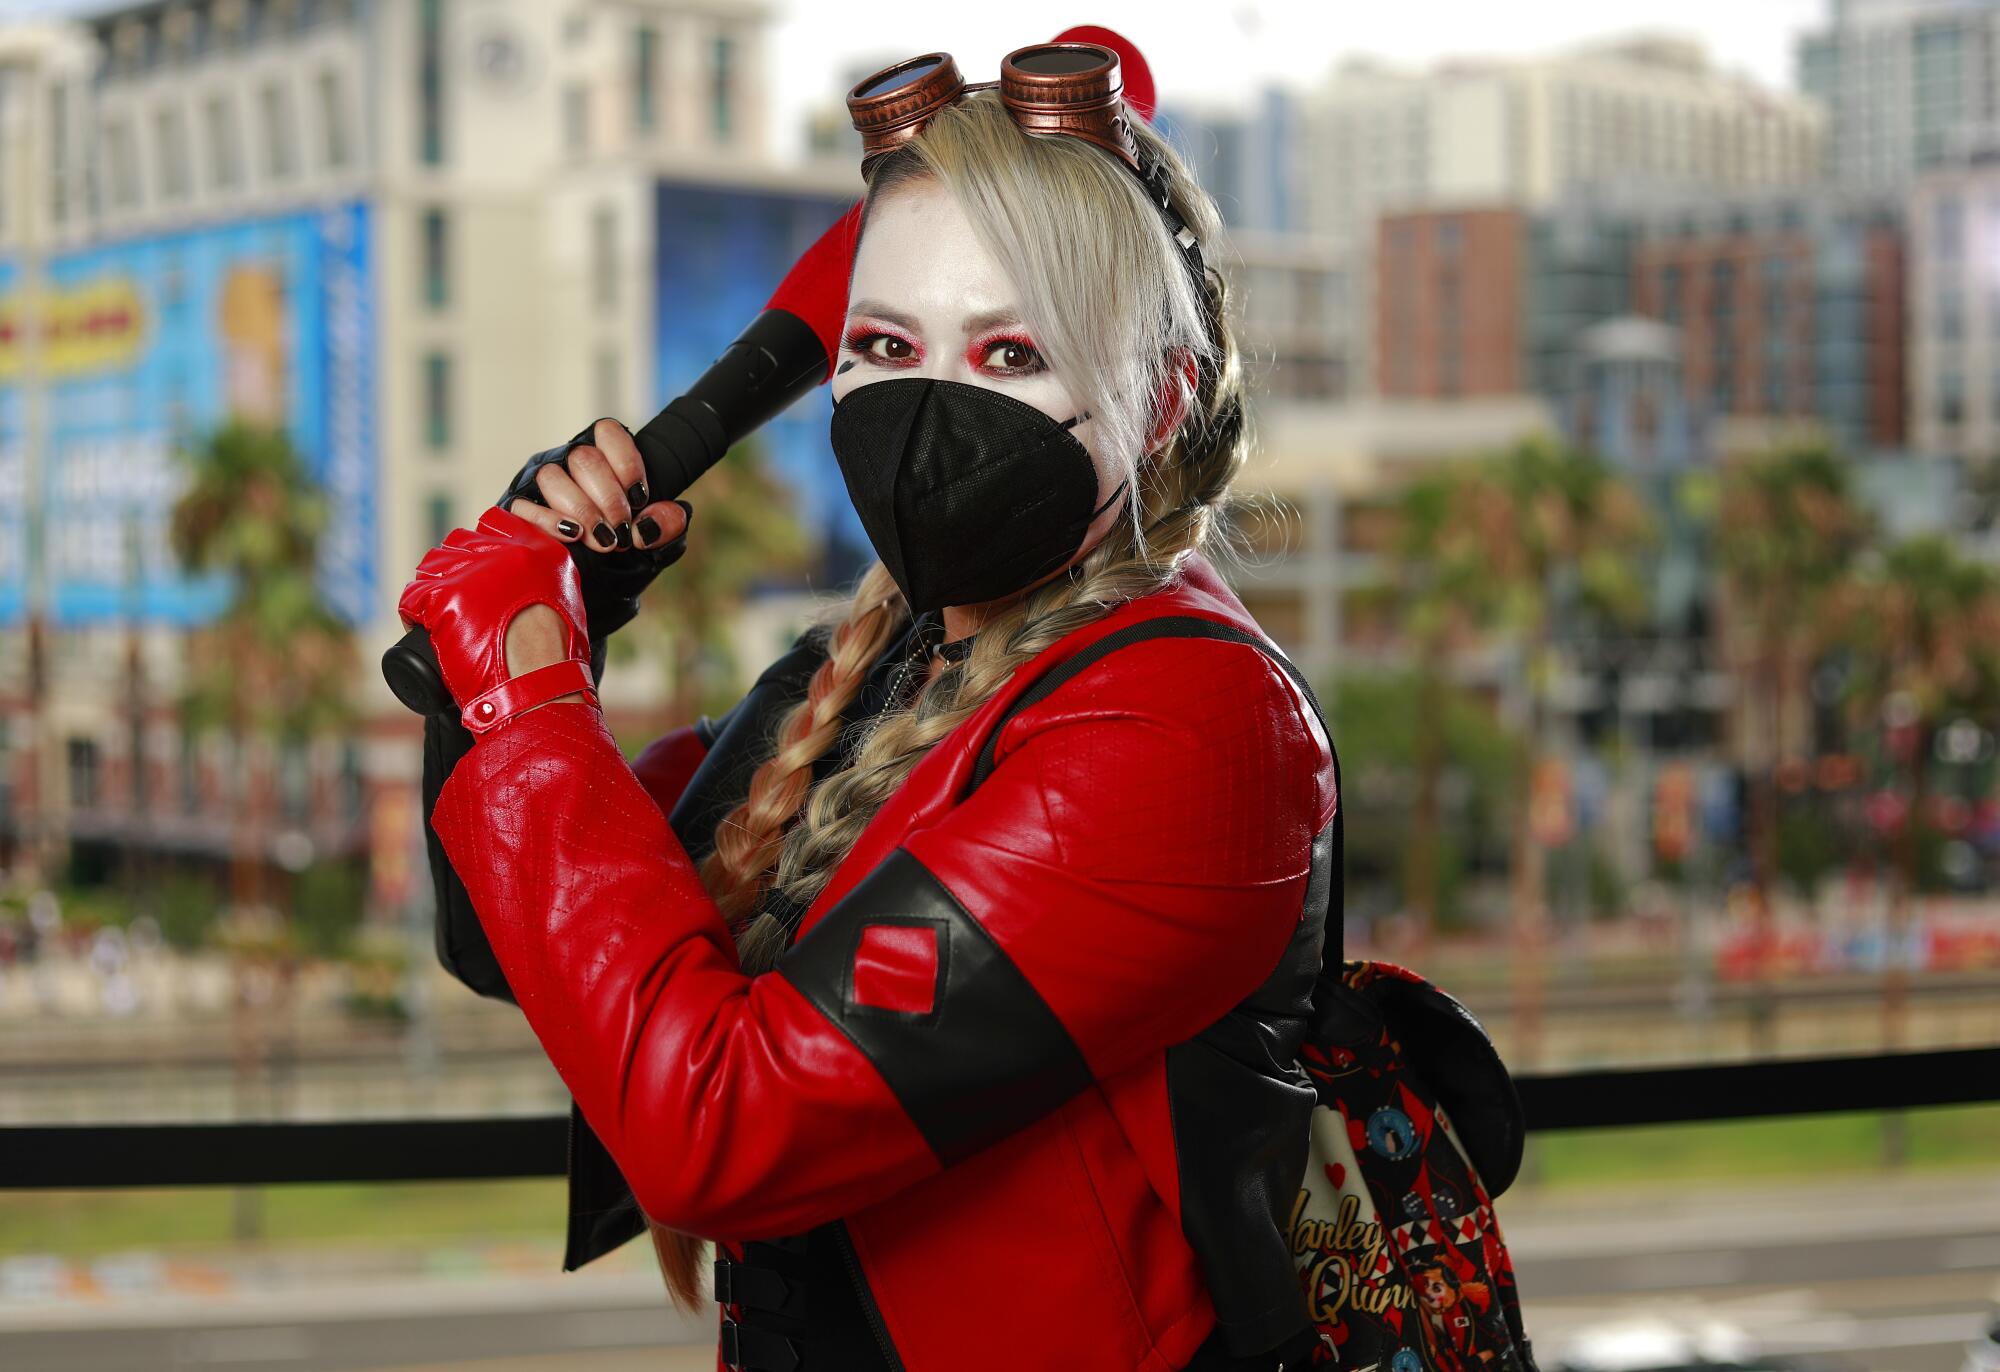 Zee Eskeets of Albuquerque dressed as Harley Quinn at Comic-Con.